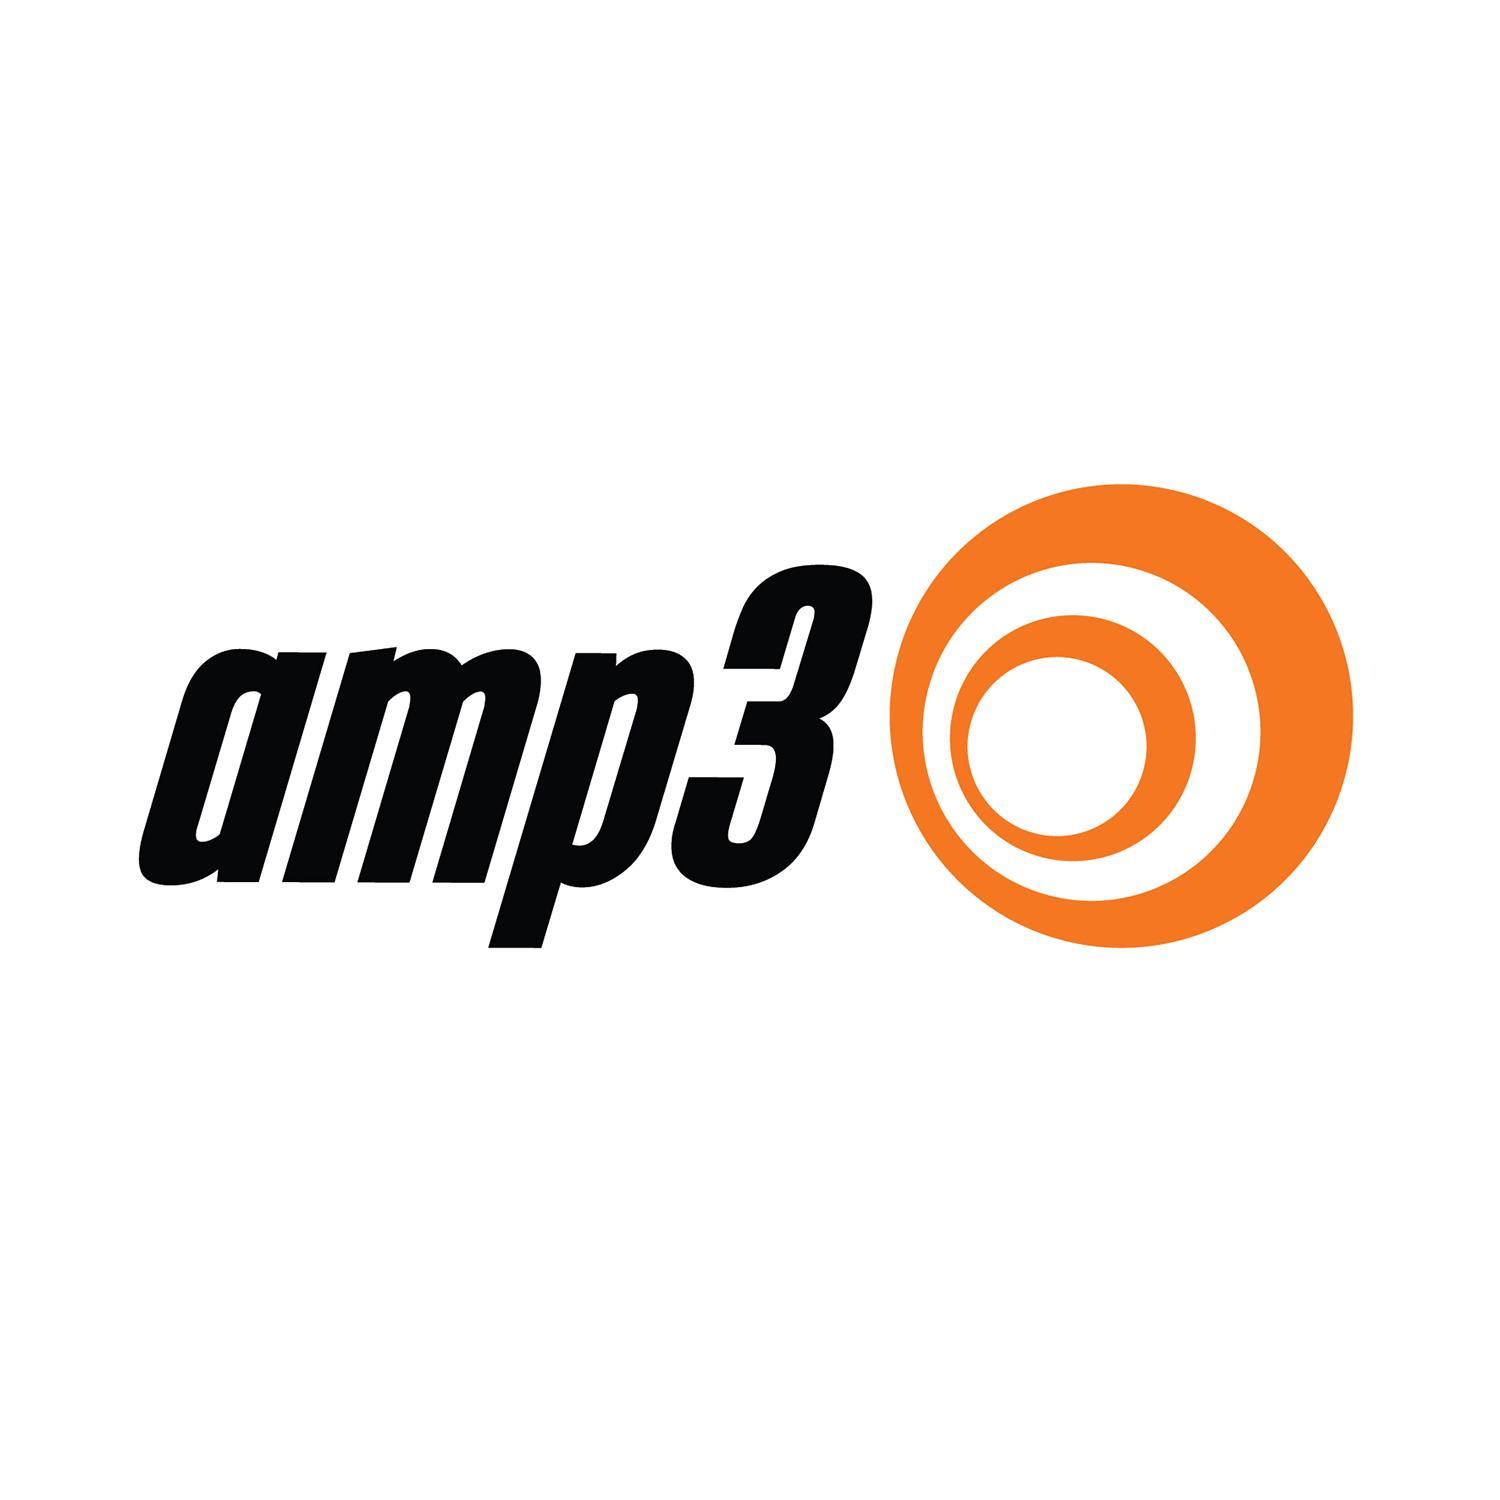 Welcome back to AMP3!